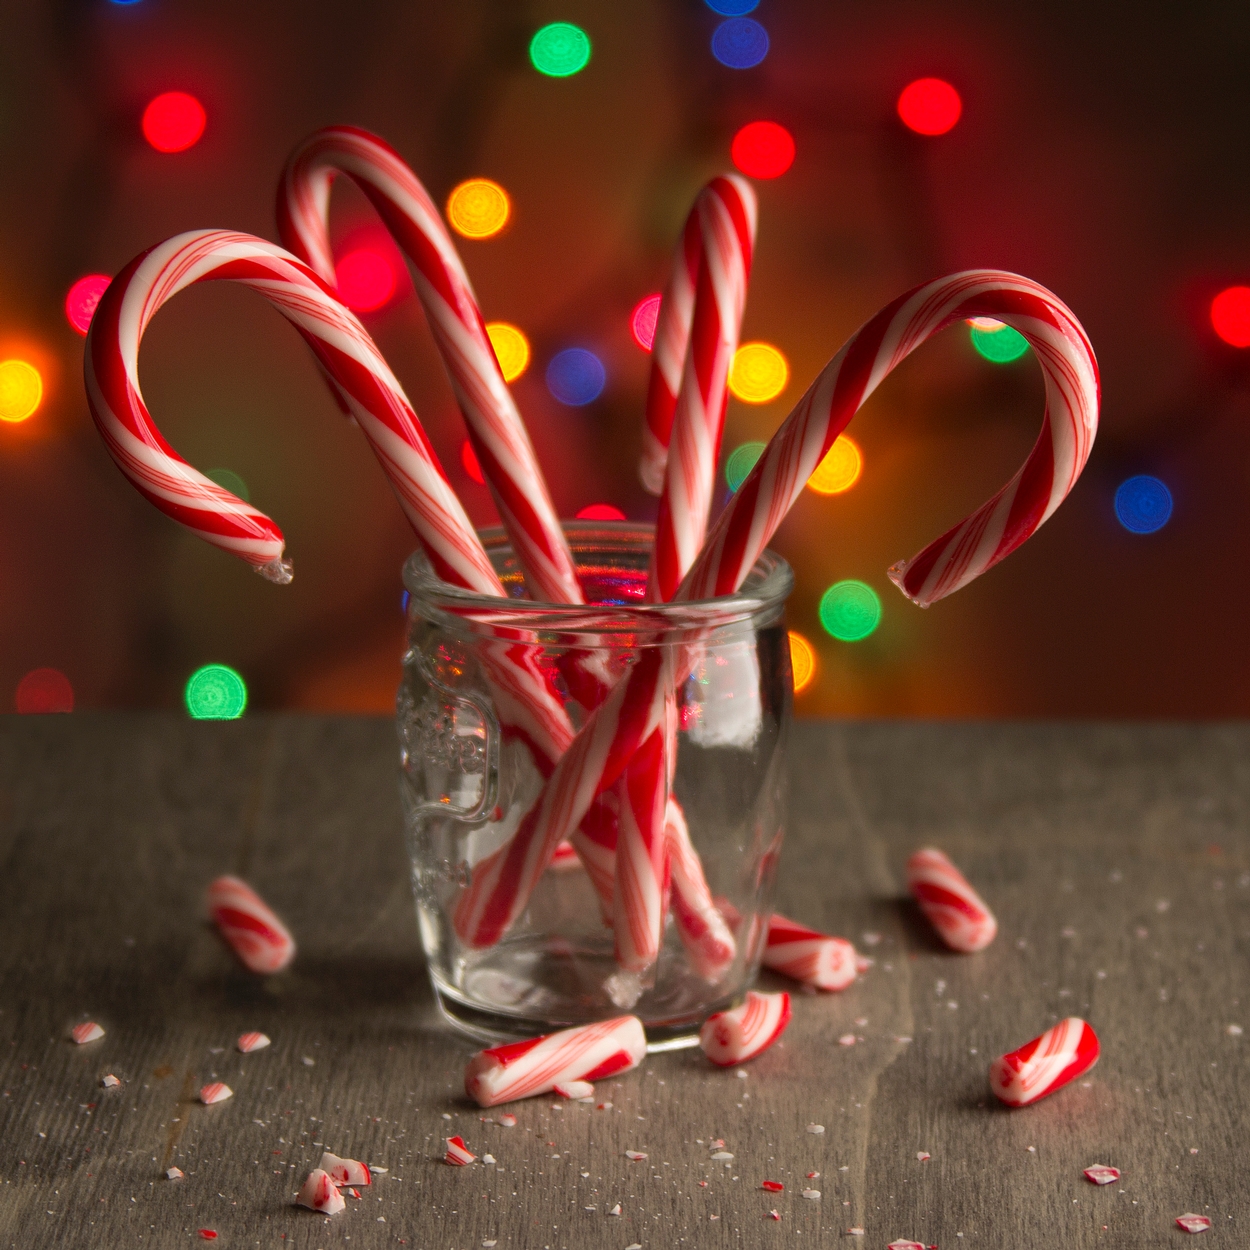 Albums 100+ Pictures Images Of Candy Canes Stunning